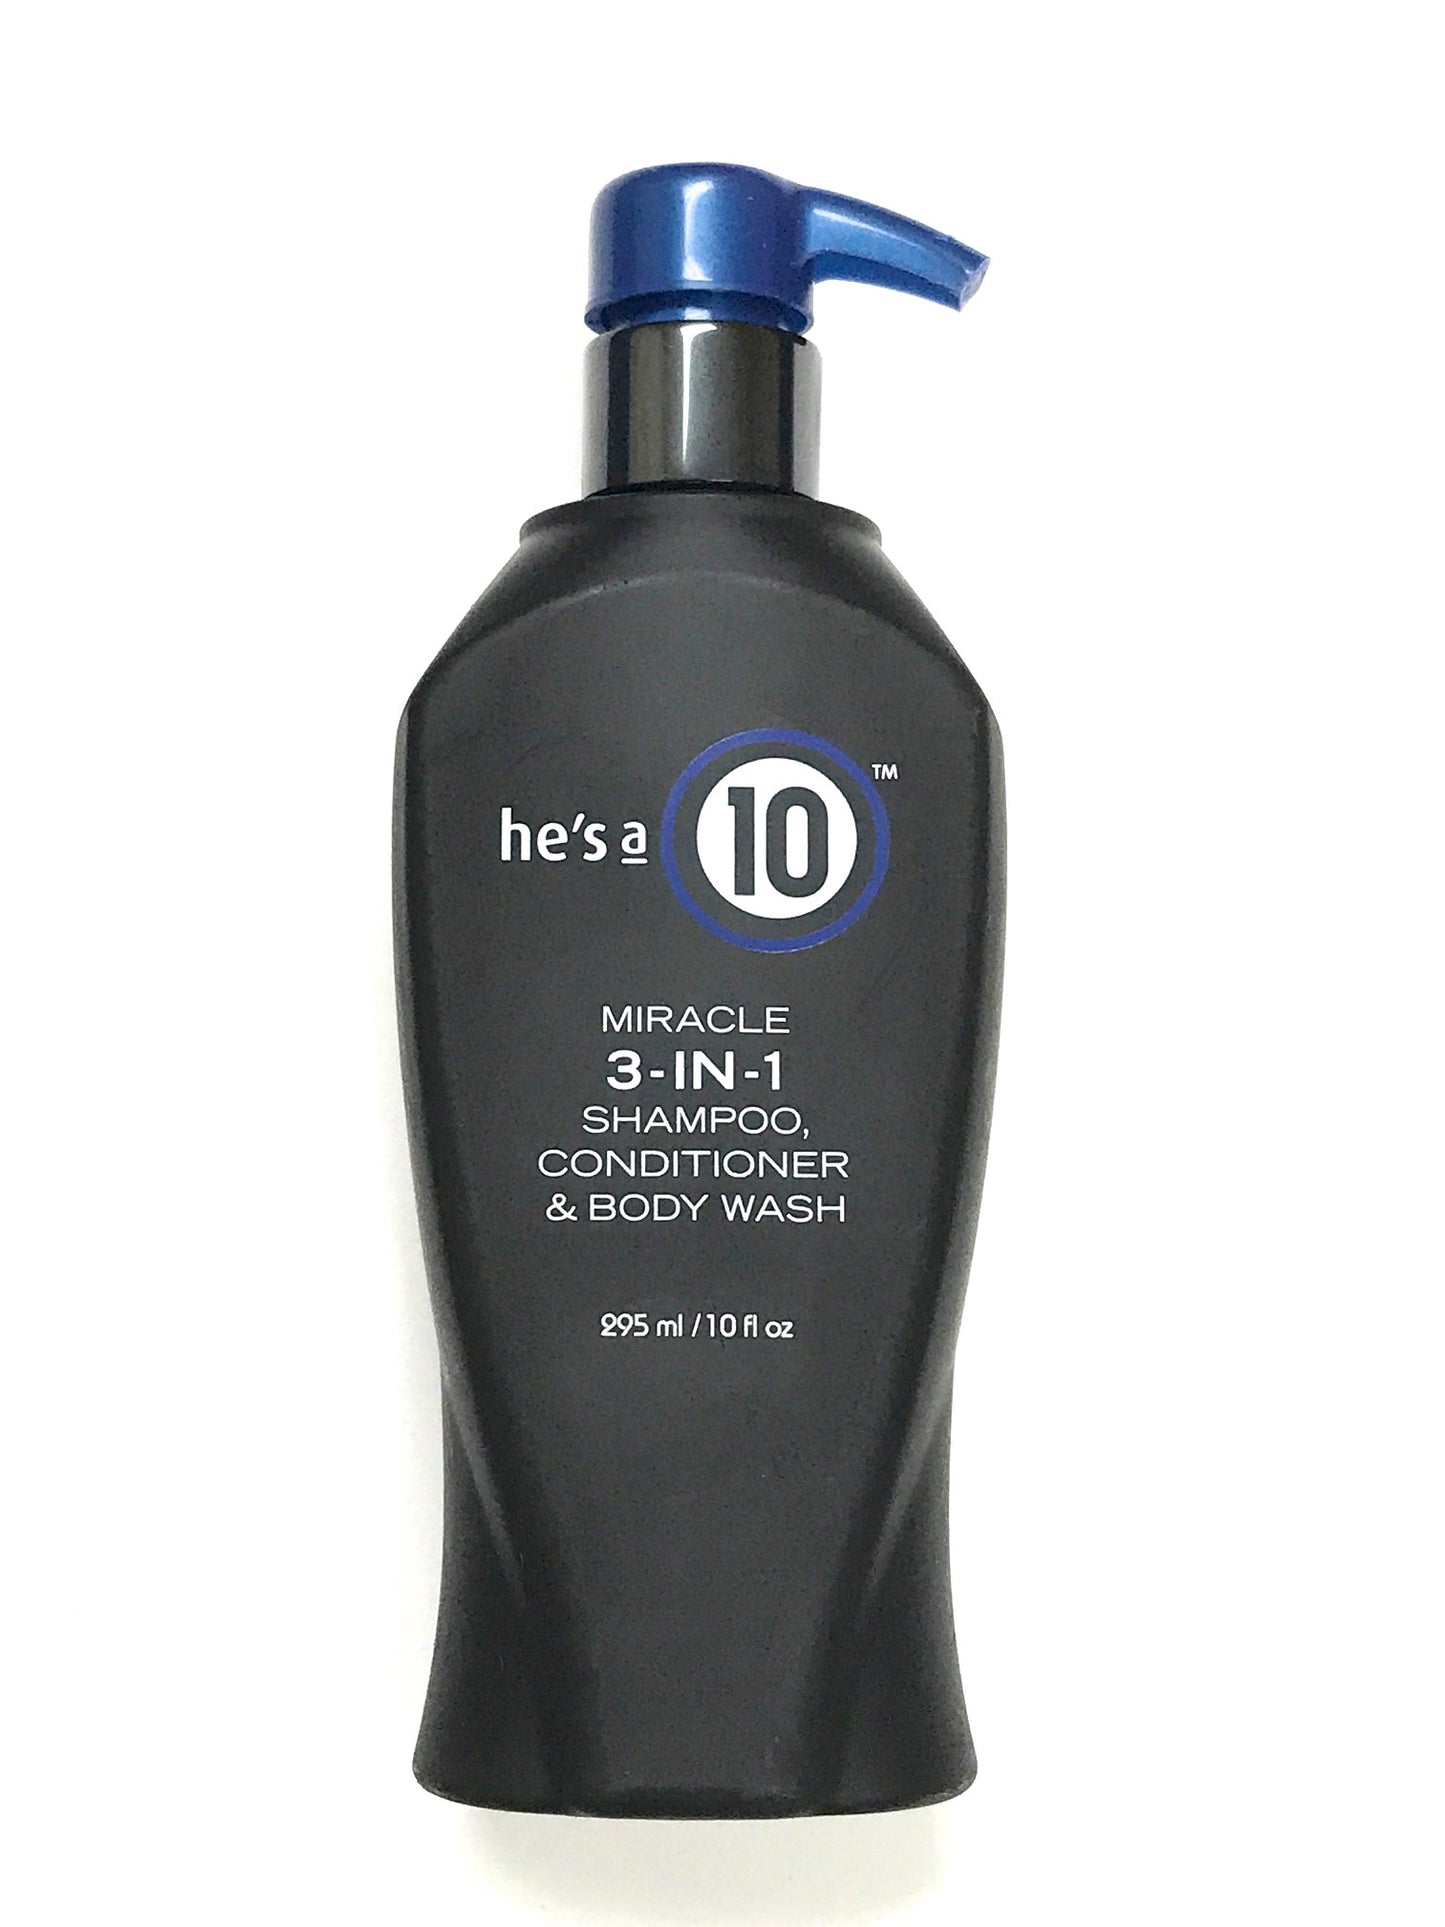 He's A 10 Miracle 3 In 1 Shampoo, Conditioner And Body Wash 10 oz